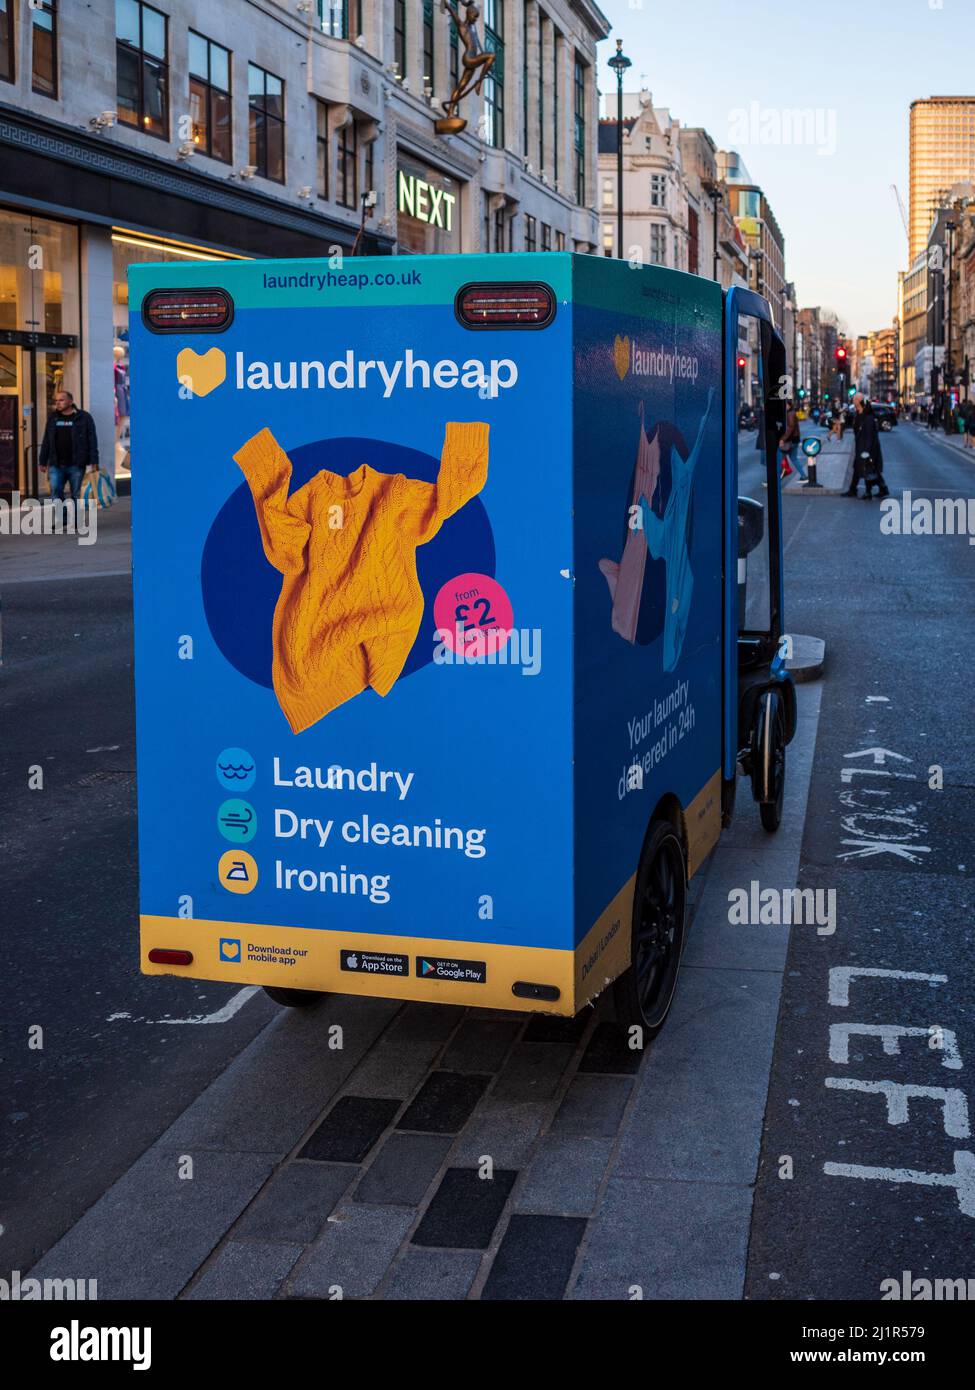 LaundryHeap eco friendly clean laundry delivery service London. Founded in 2014 it provides an online laundry collection and delivery service. Stock Photo